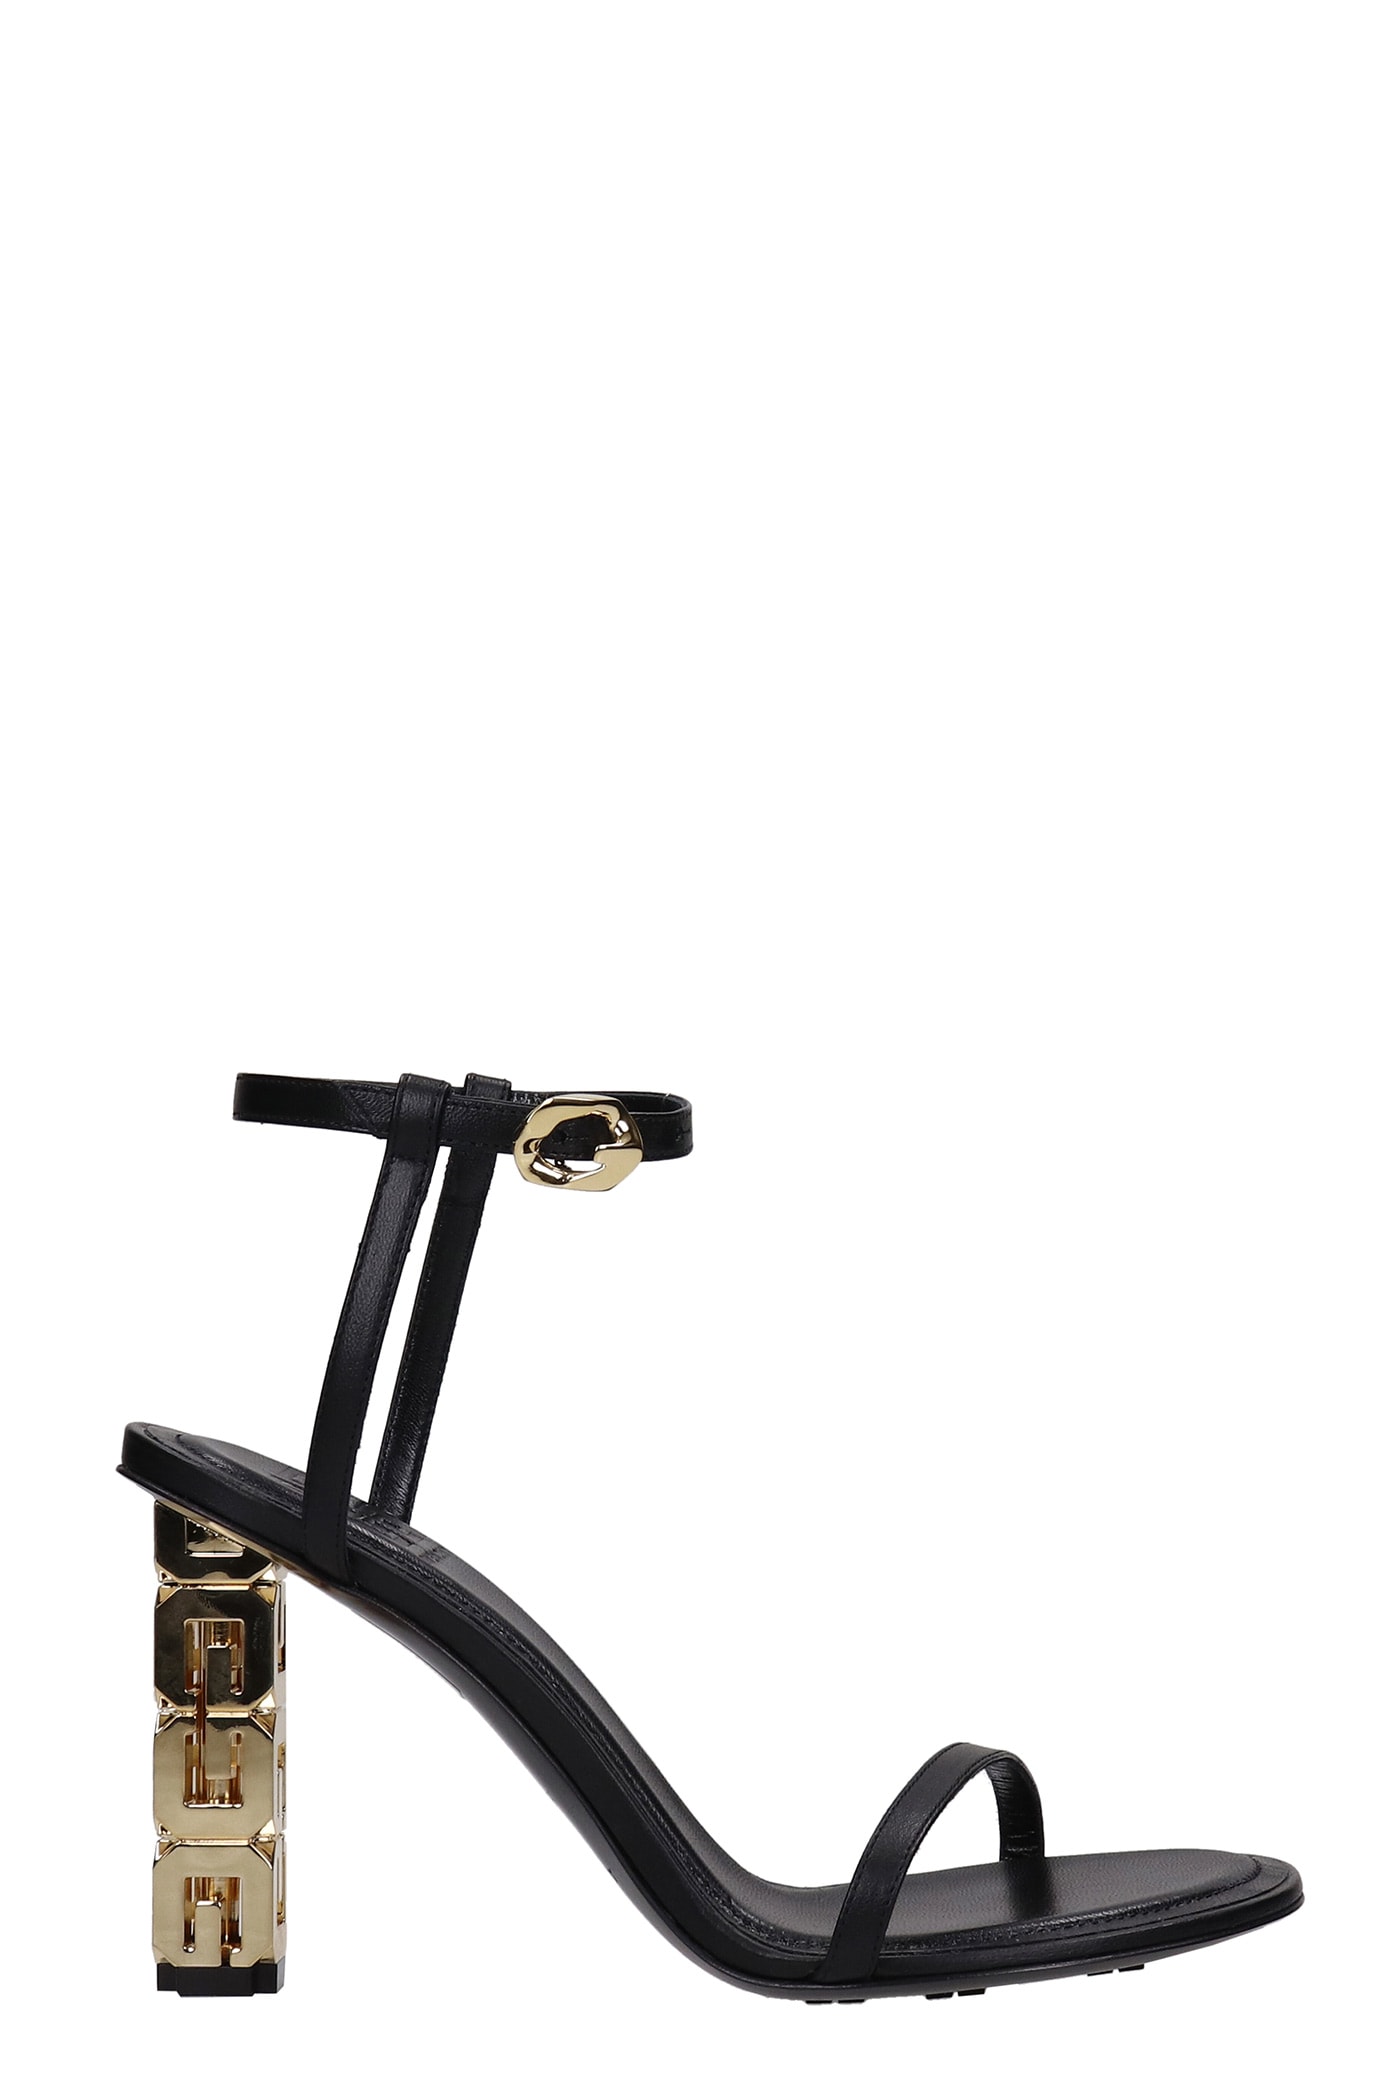 Givenchy Sandals In Black Leather